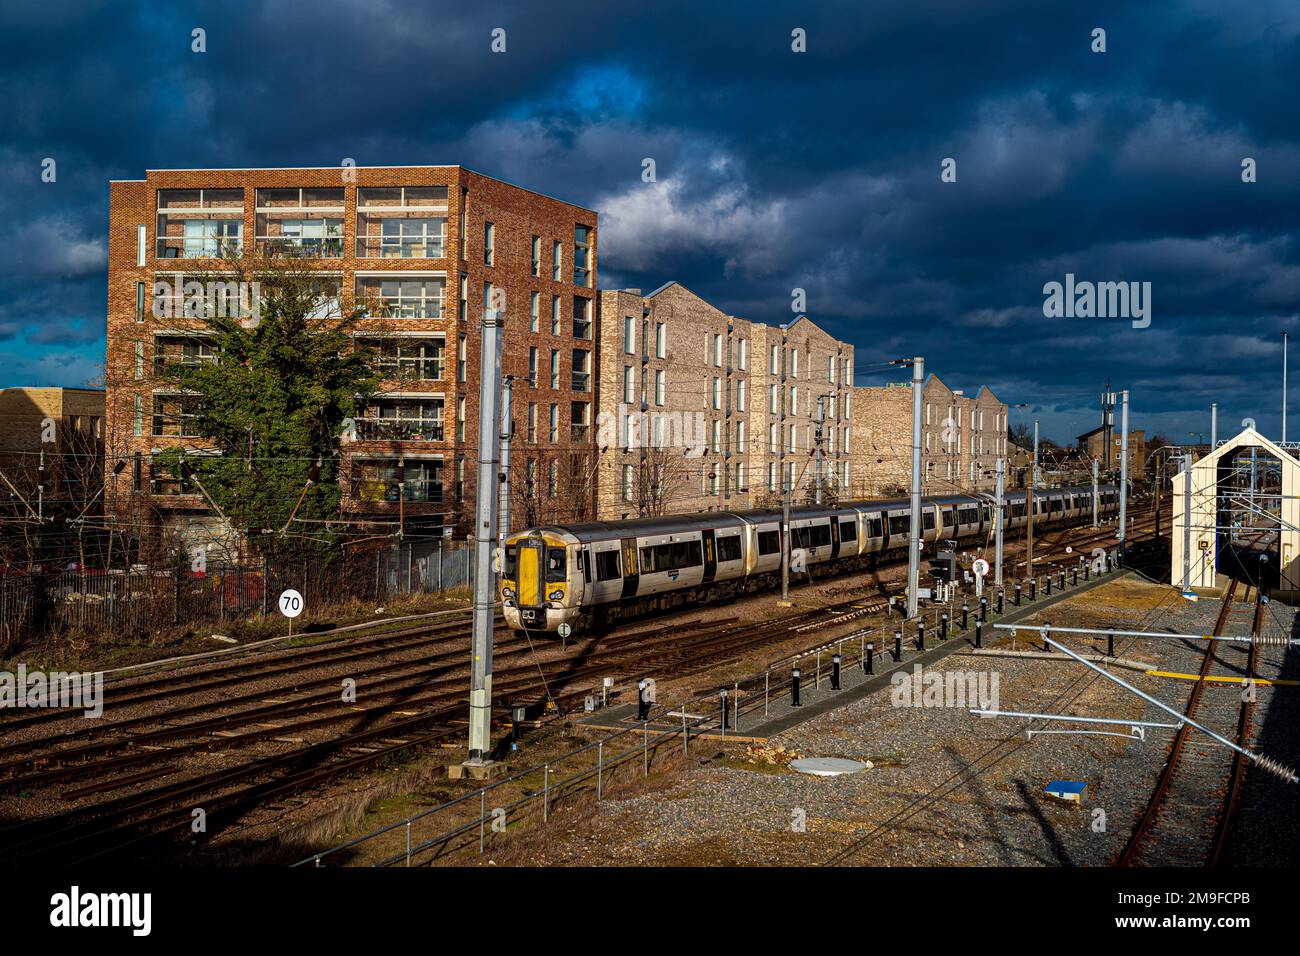 Great Northern train arrives at Cambridge Railway Station passing new build housing in the brownfield Cambridge Ironworks developmen. Stock Photo